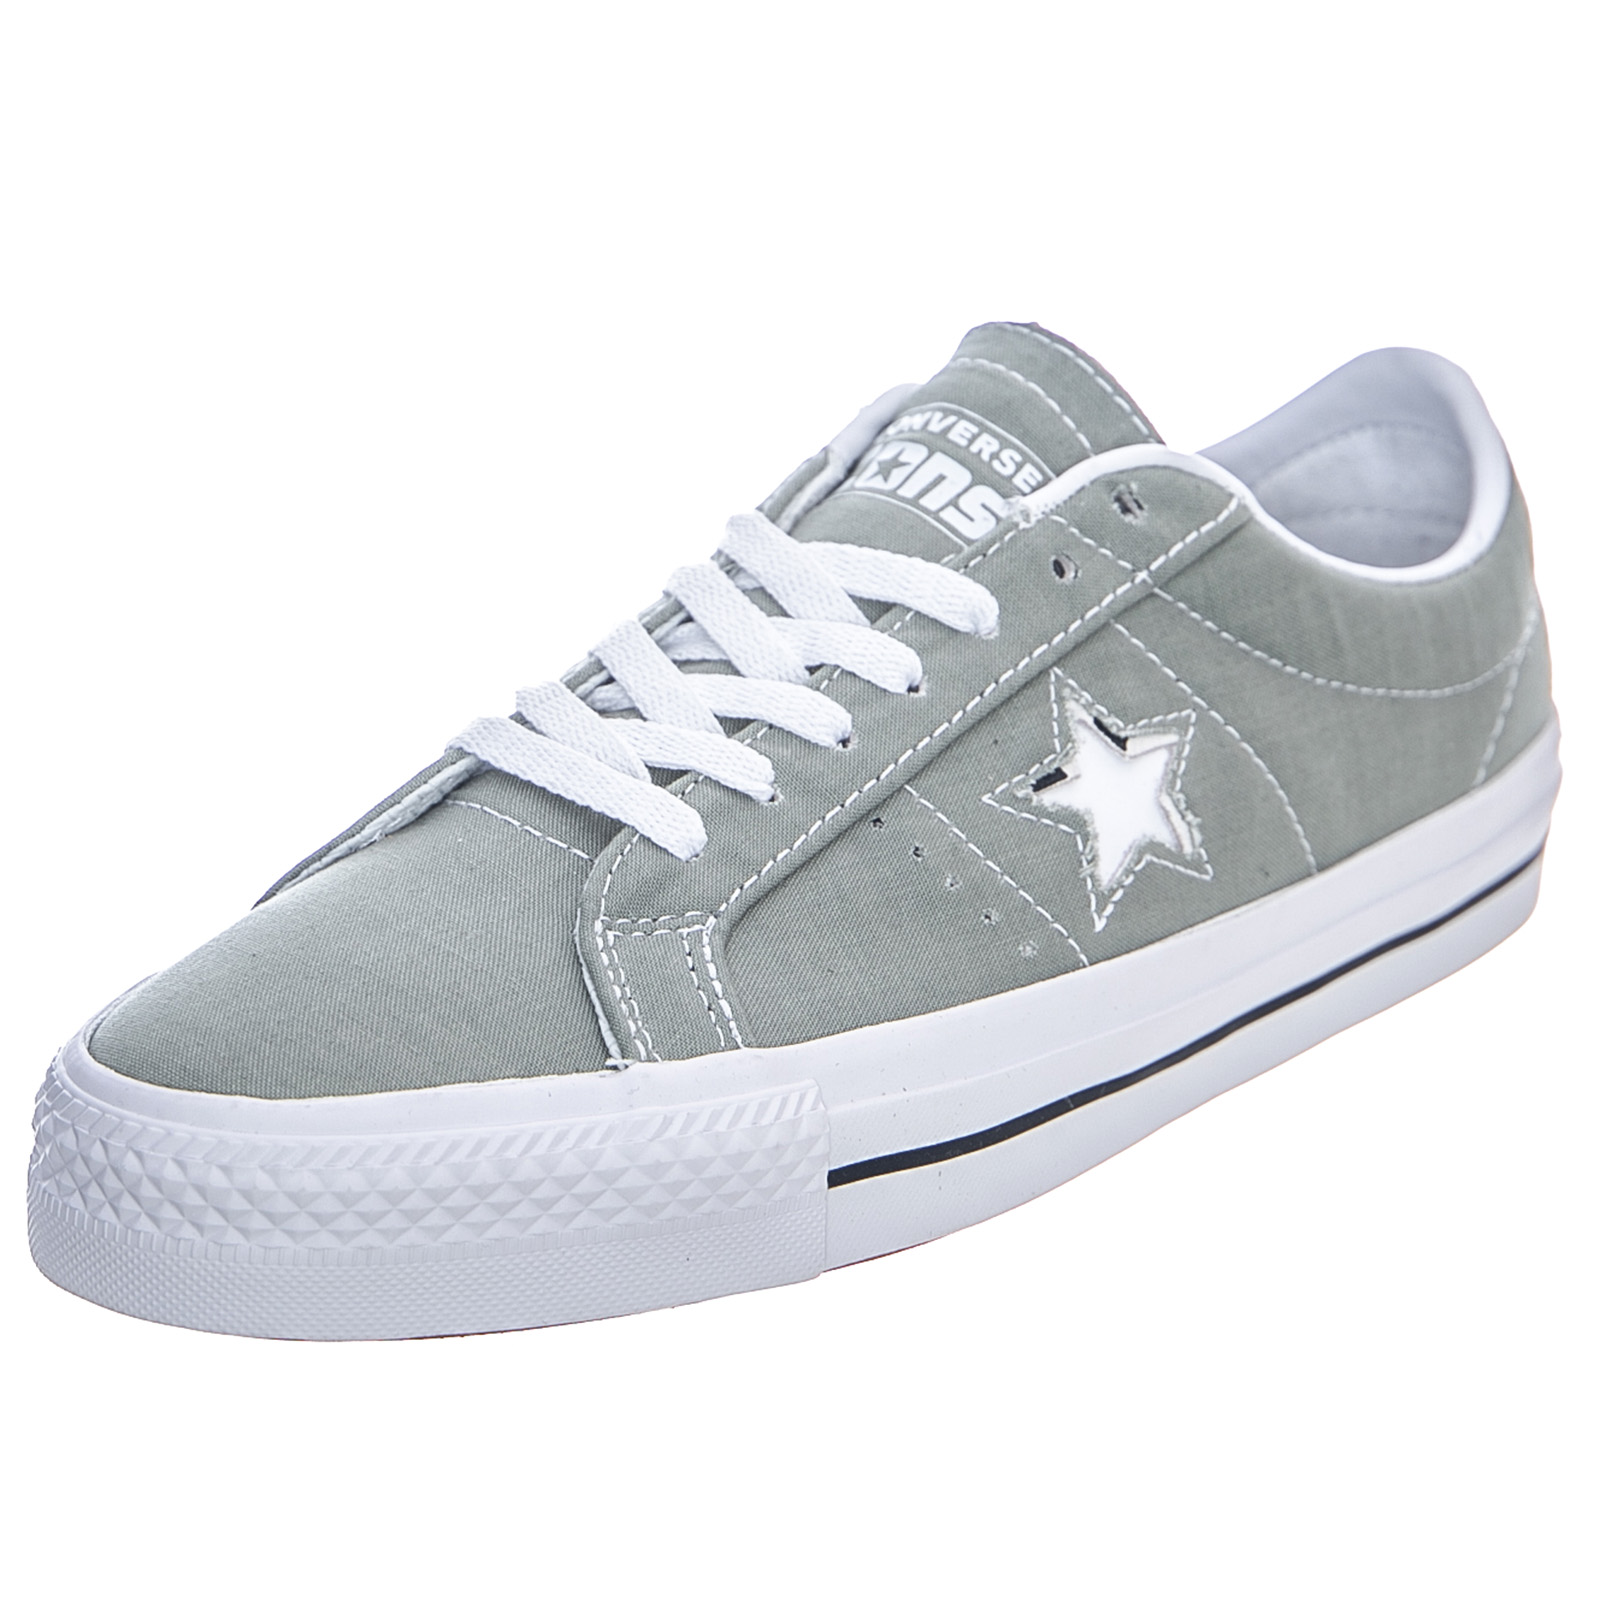 Converse Basse Uomo Verde on Sale, UP TO 57% OFF | www ... نجفه